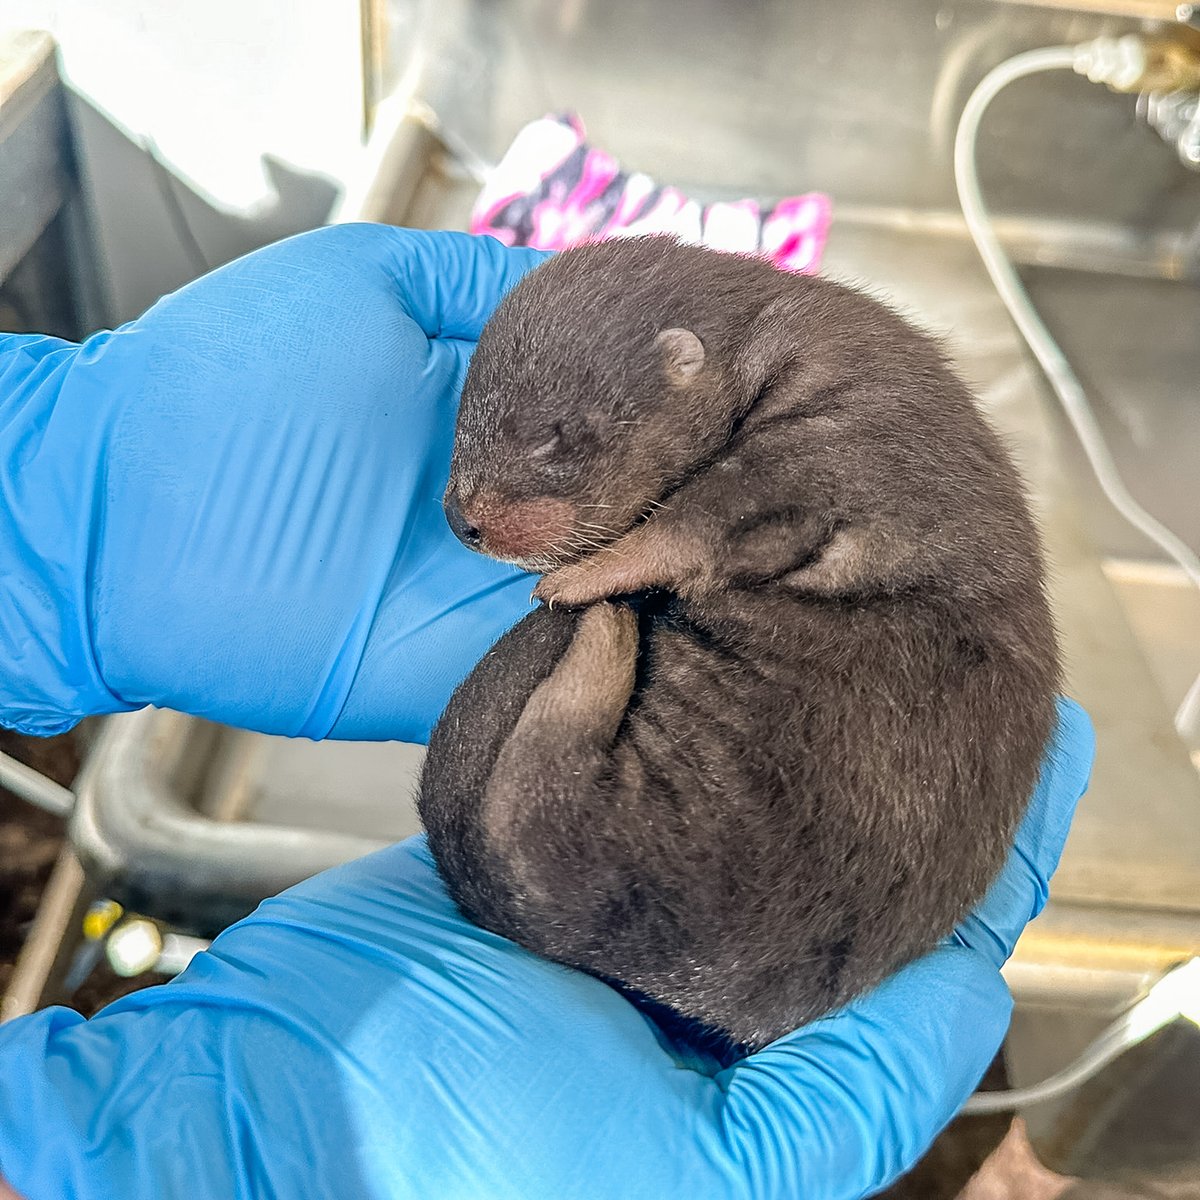 We are delighted to announce the arrival of six precious otter pups to the Lowcountry Zoo! Born on January 20th, we welcome 5 beautiful females and 1 handsome male to our otter family. #BrookgreenGardens #OtterPups #NewArrivals #BabyZooAnimals